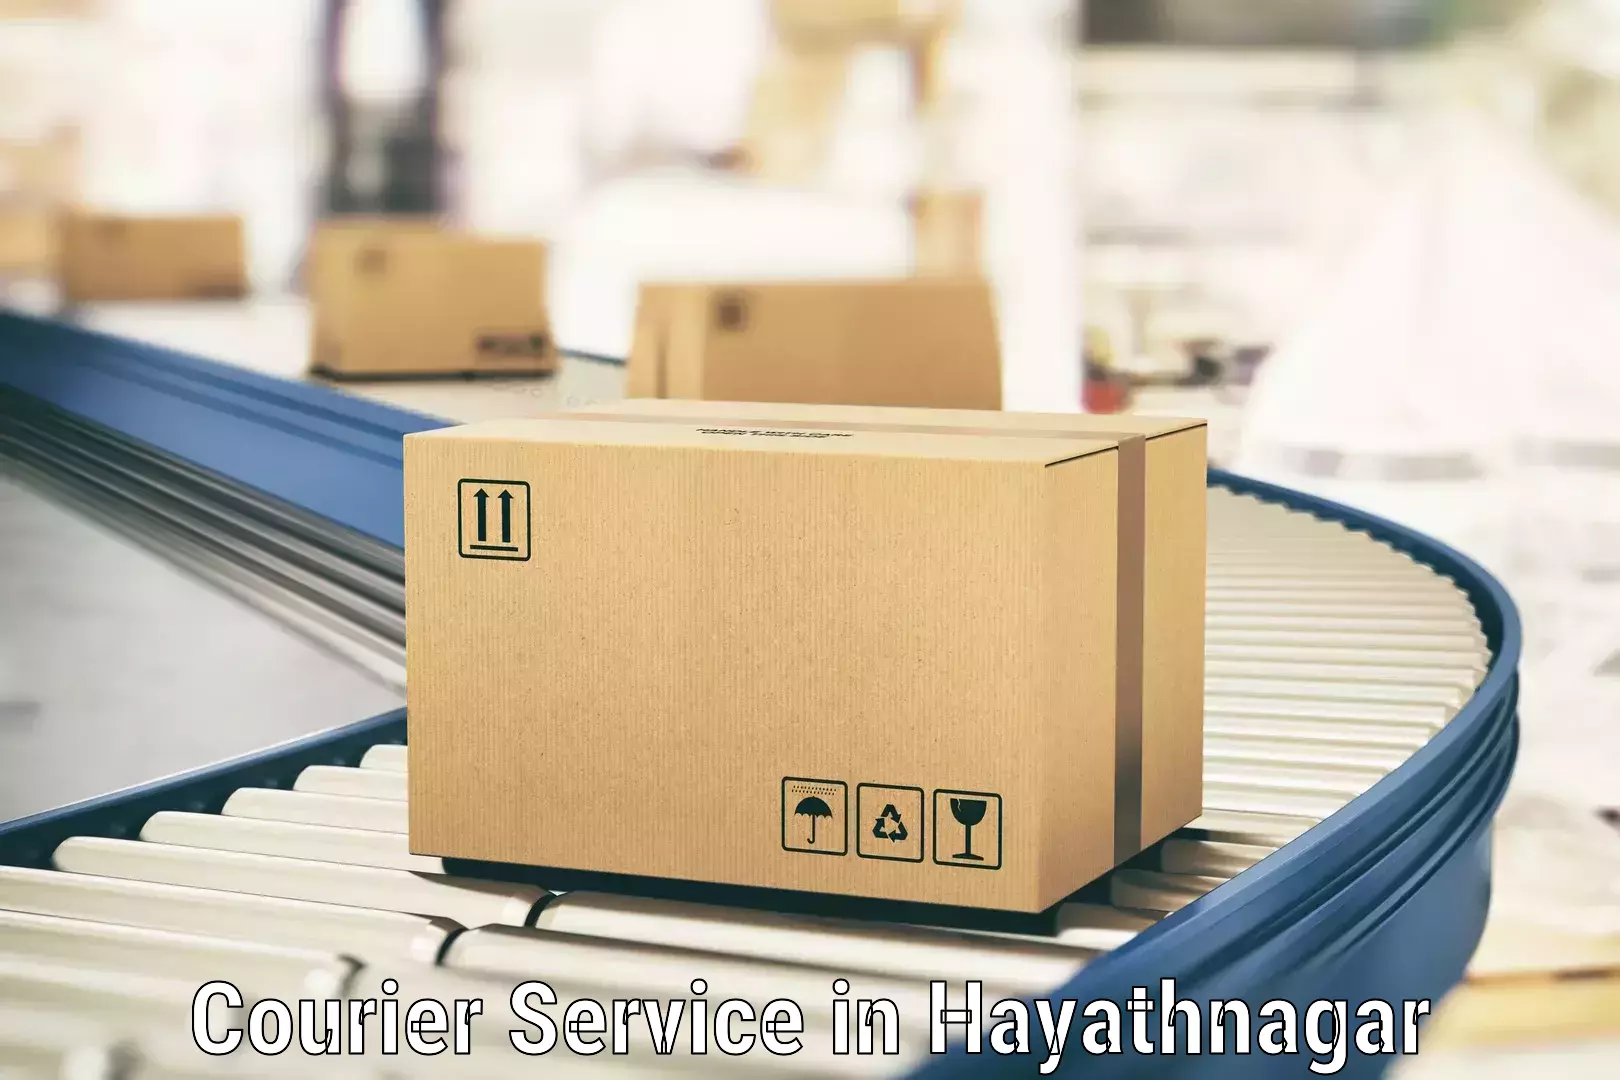 State-of-the-art courier technology in Hayathnagar